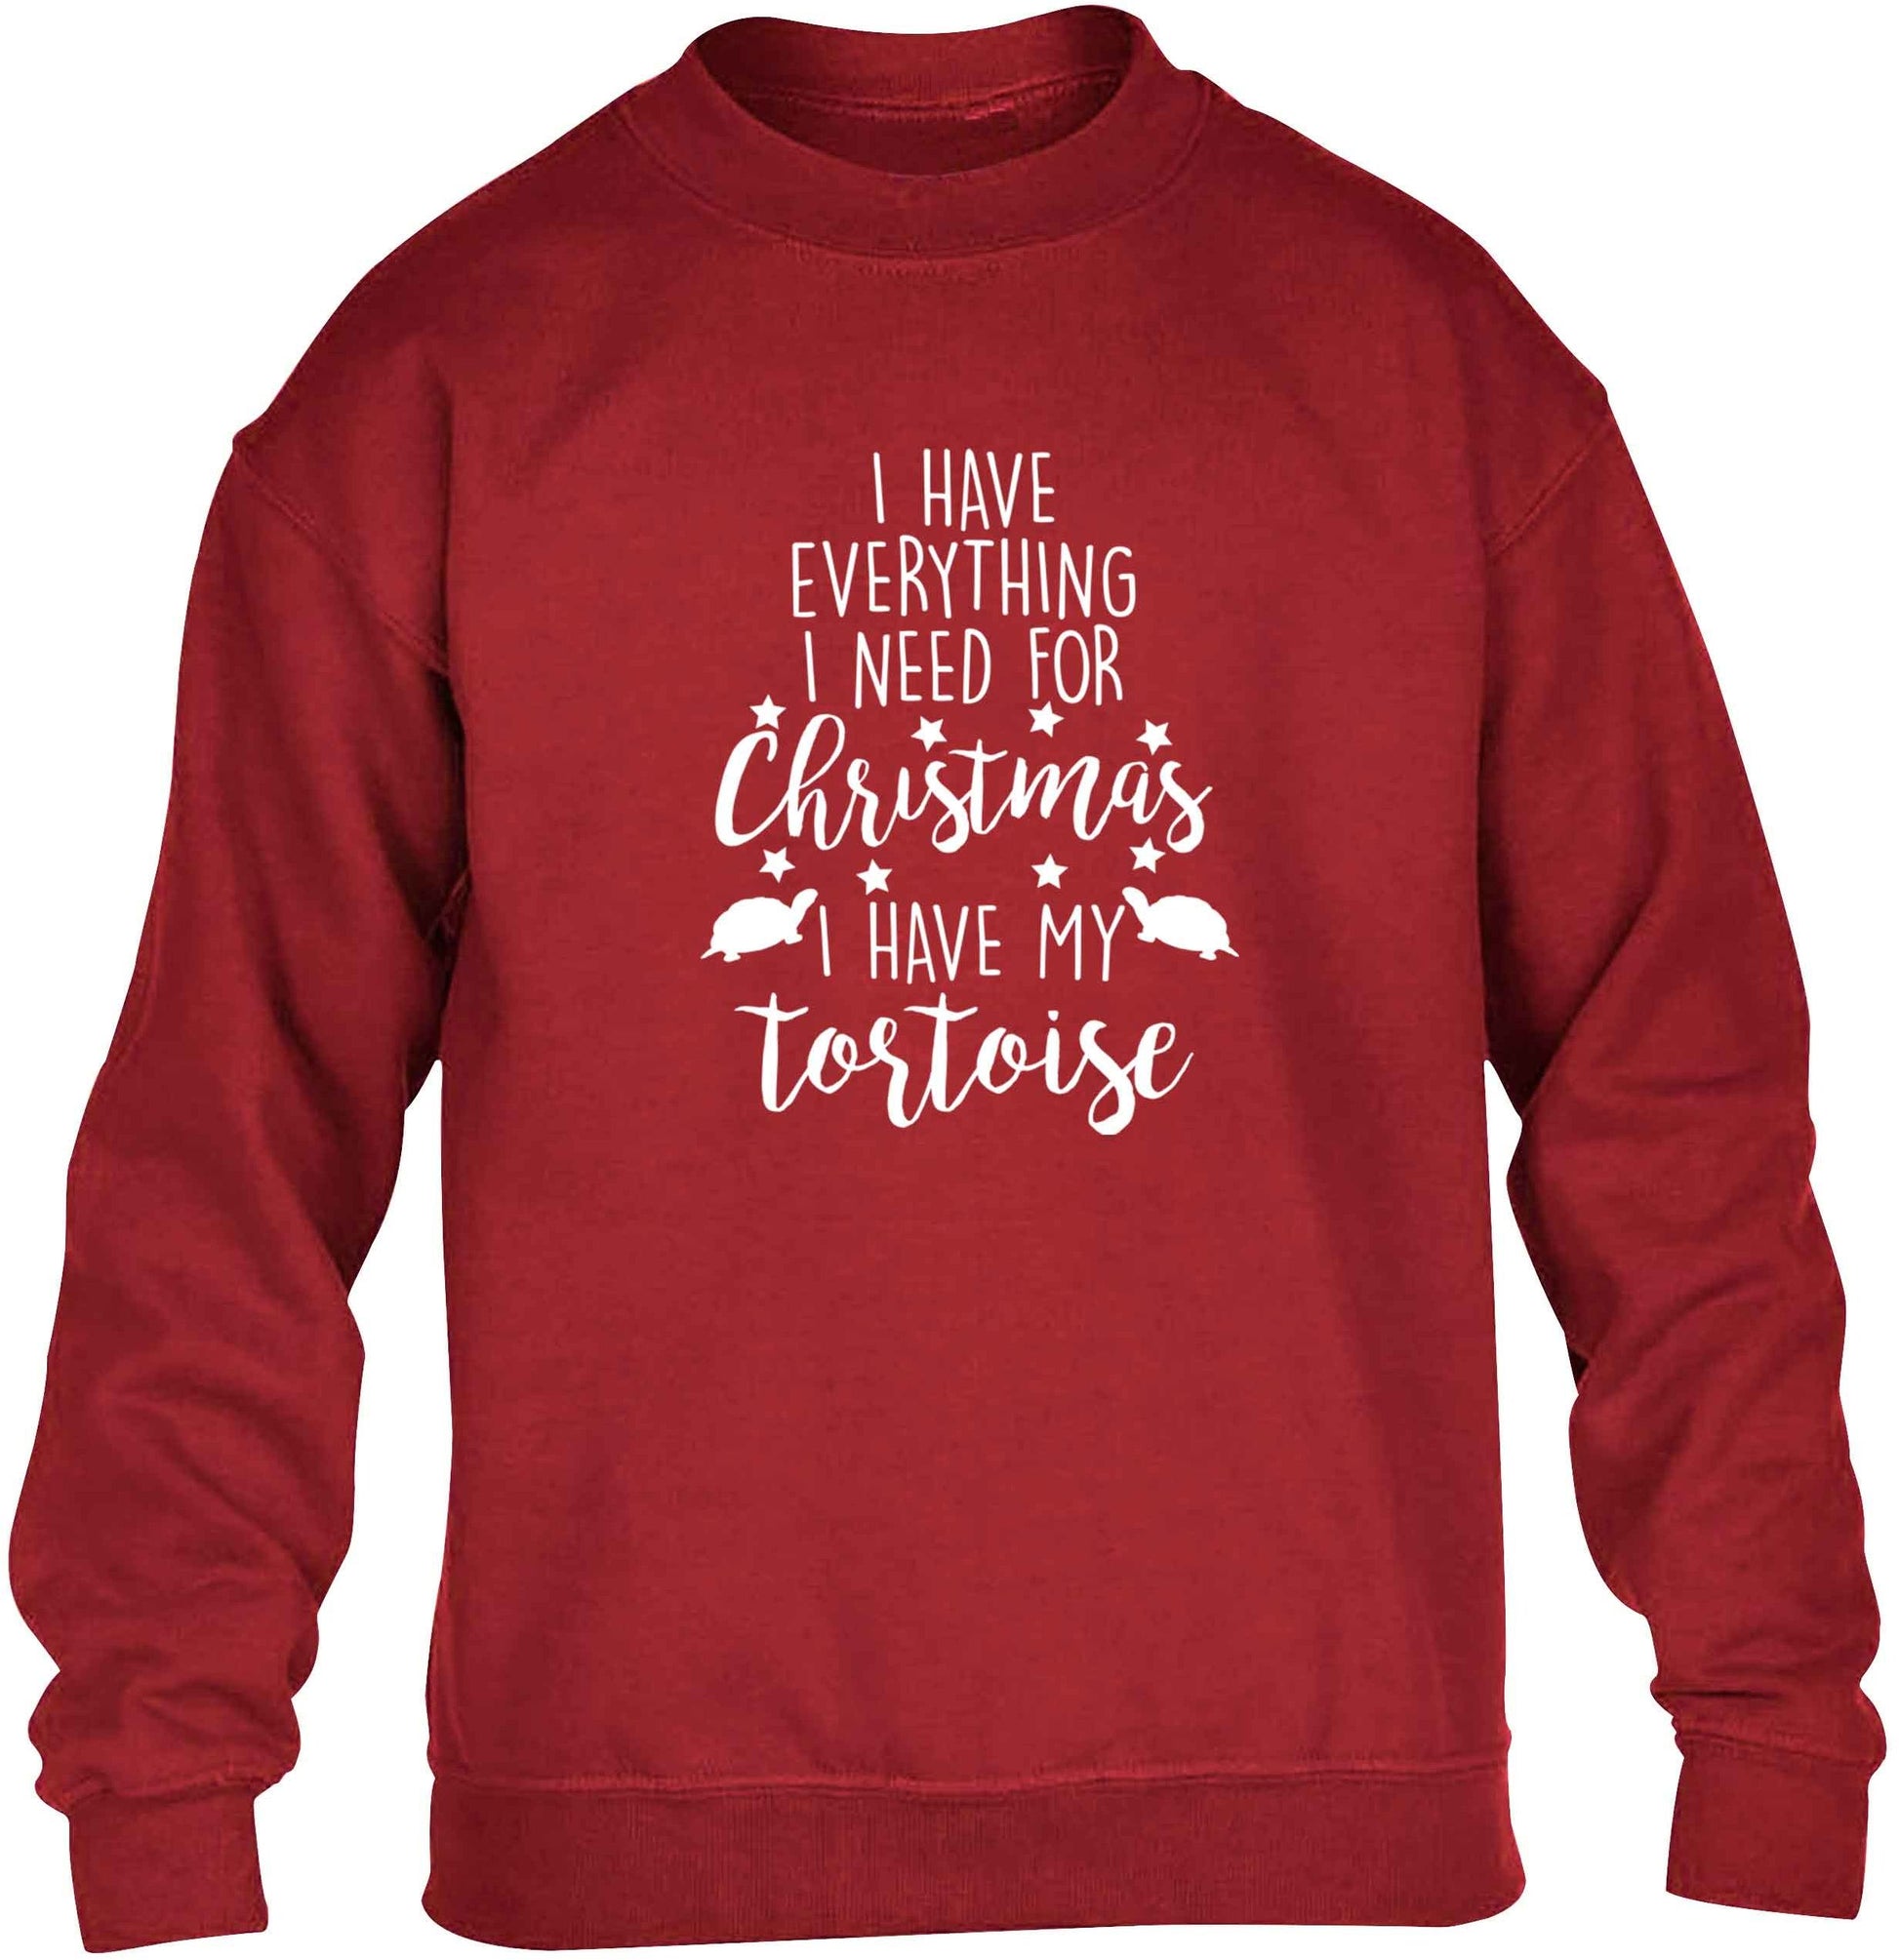 I have everything I need for Christmas I have my tortoise children's grey sweater 12-13 Years